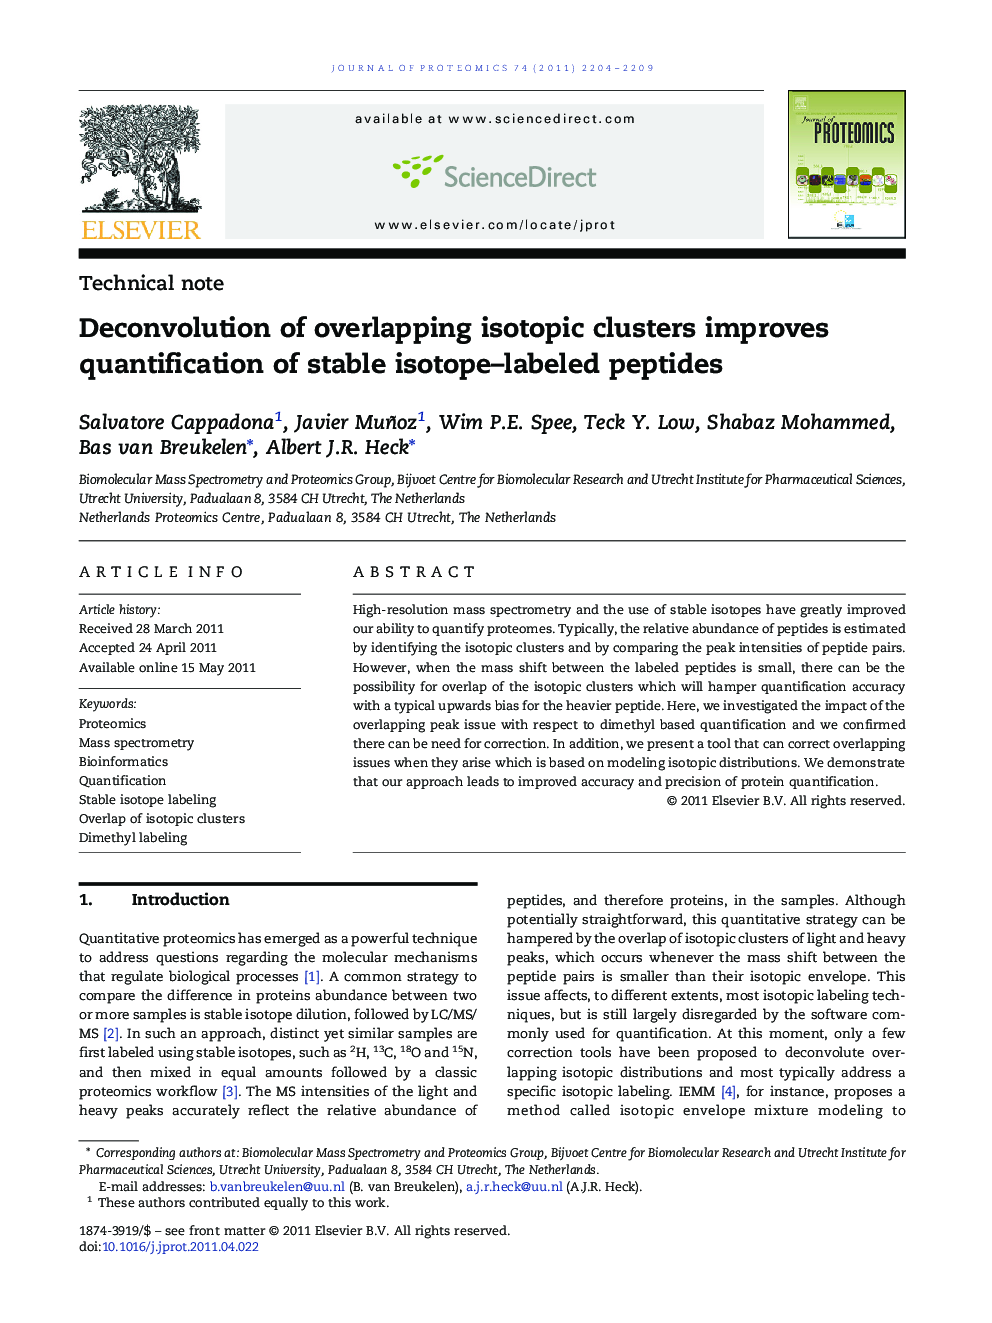 Deconvolution of overlapping isotopic clusters improves quantification of stable isotope-labeled peptides